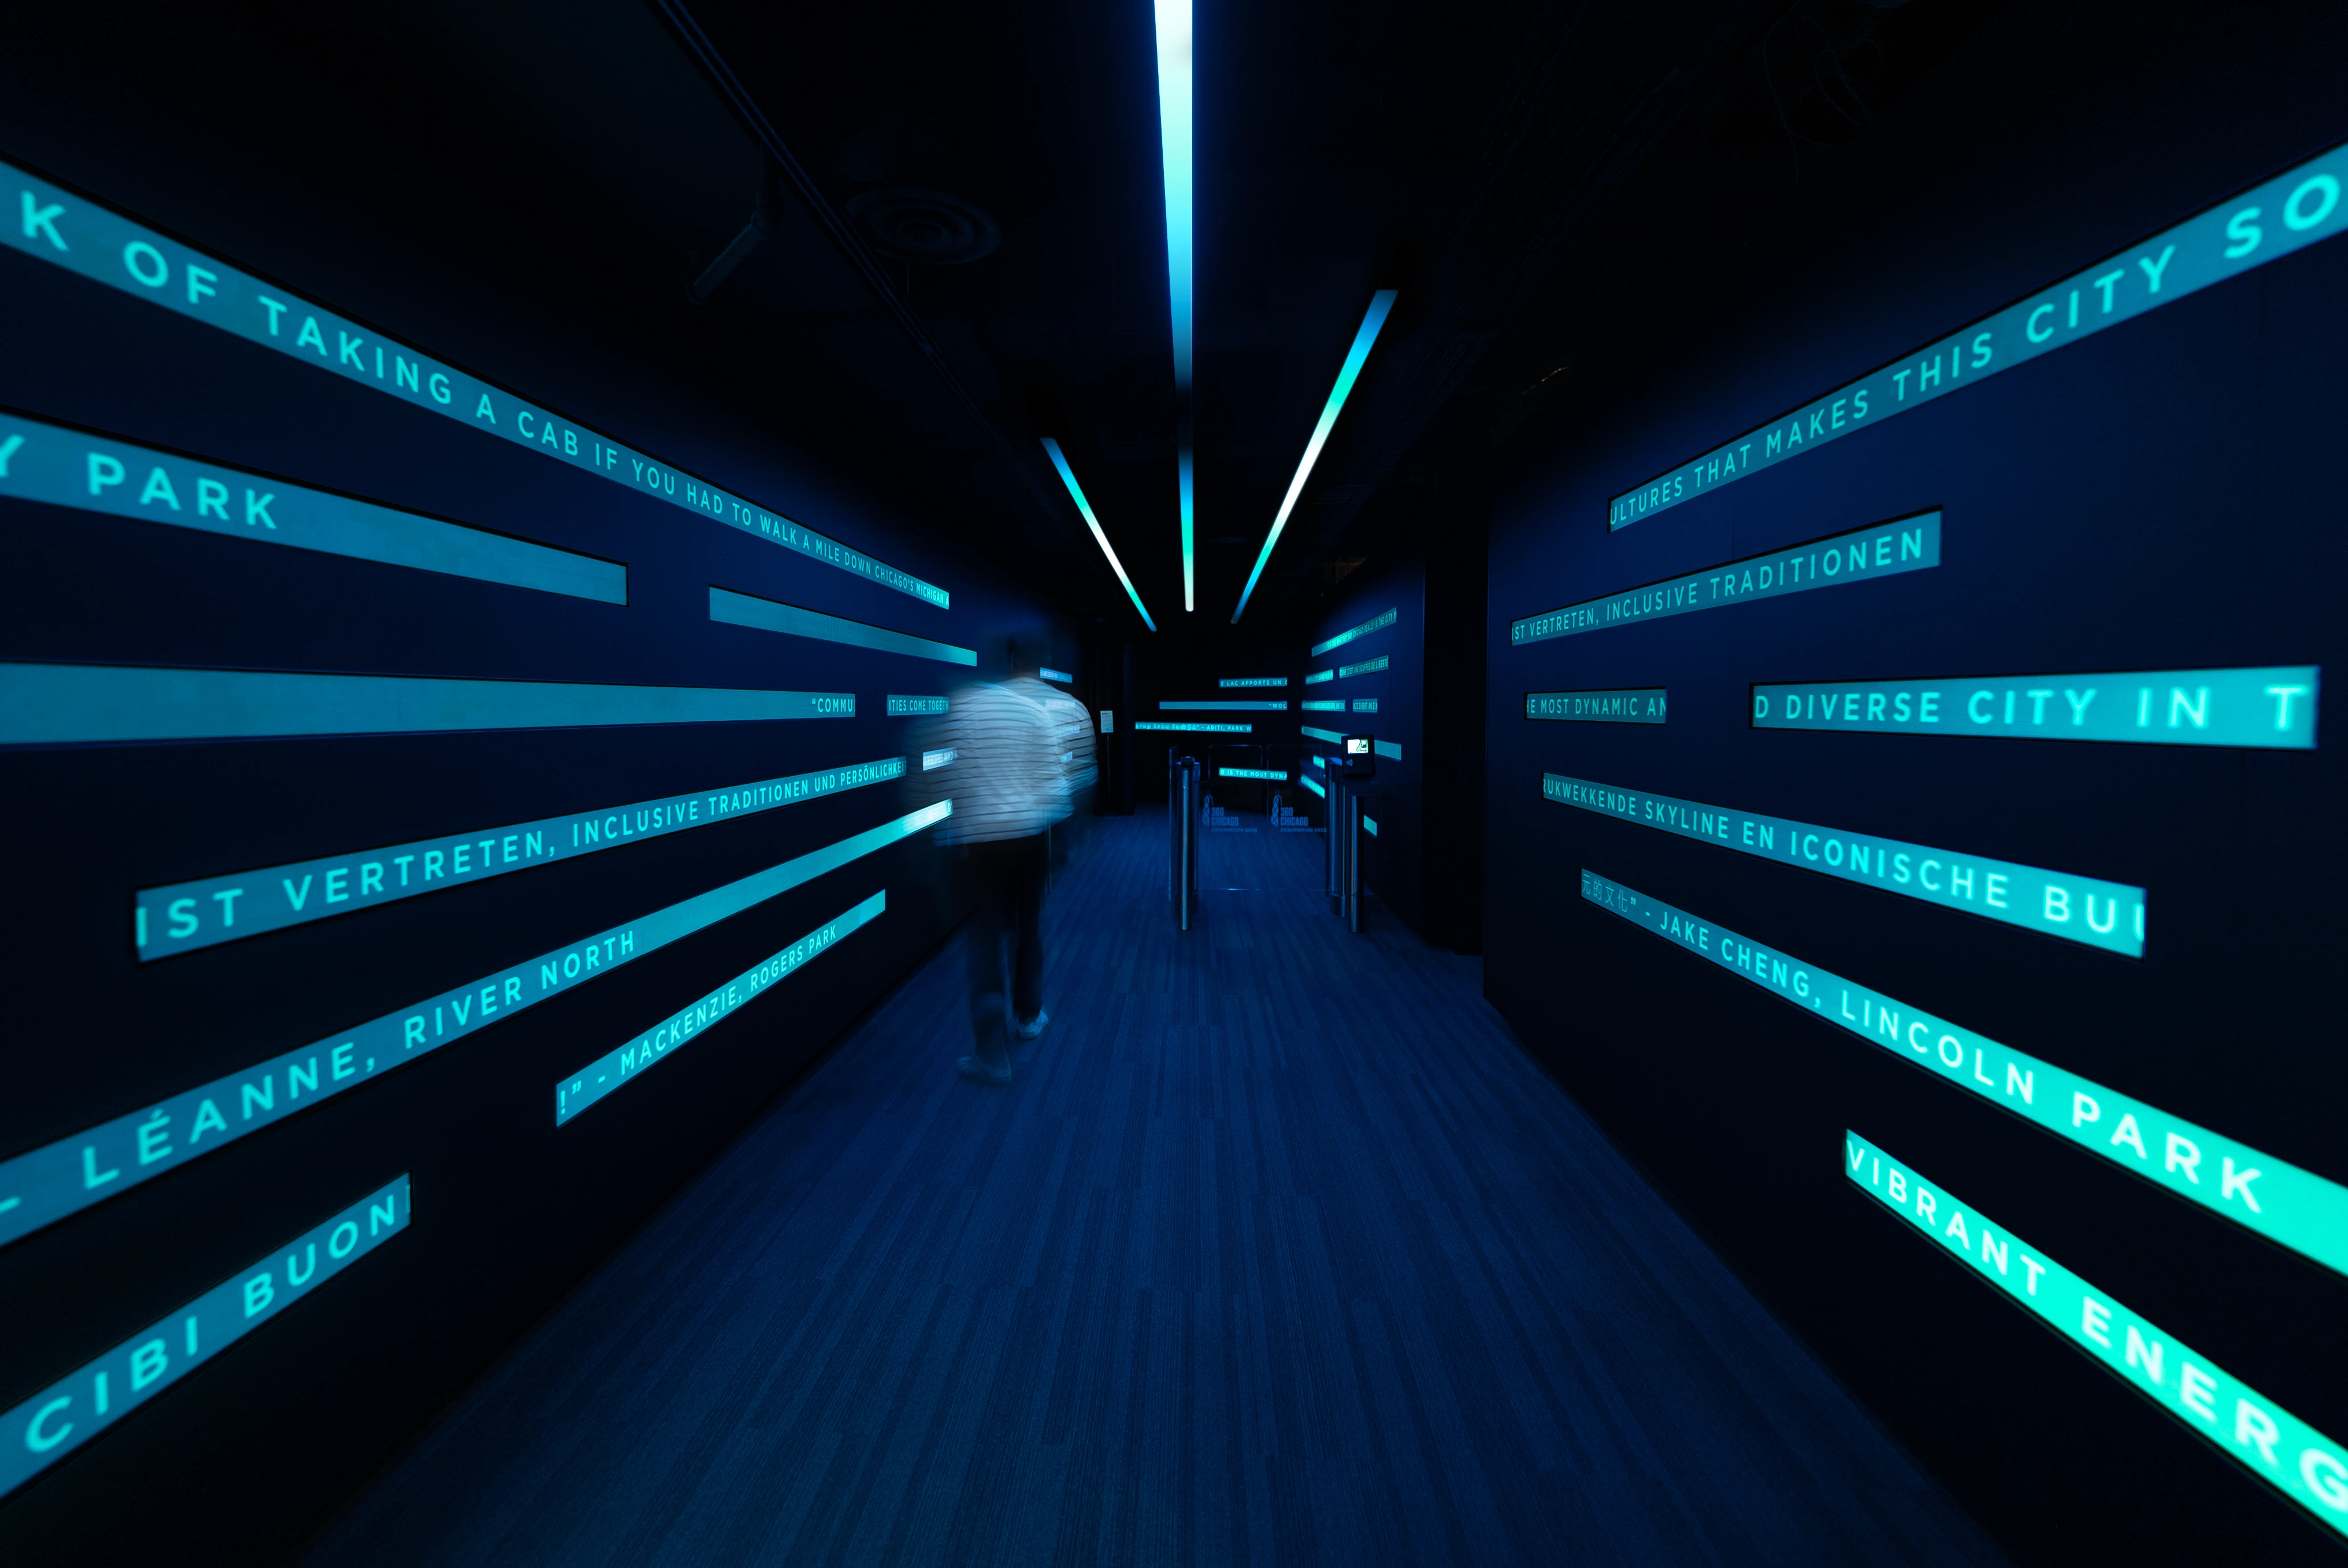 Welcome hallway experience at 360 CHICAGO immersive concourse